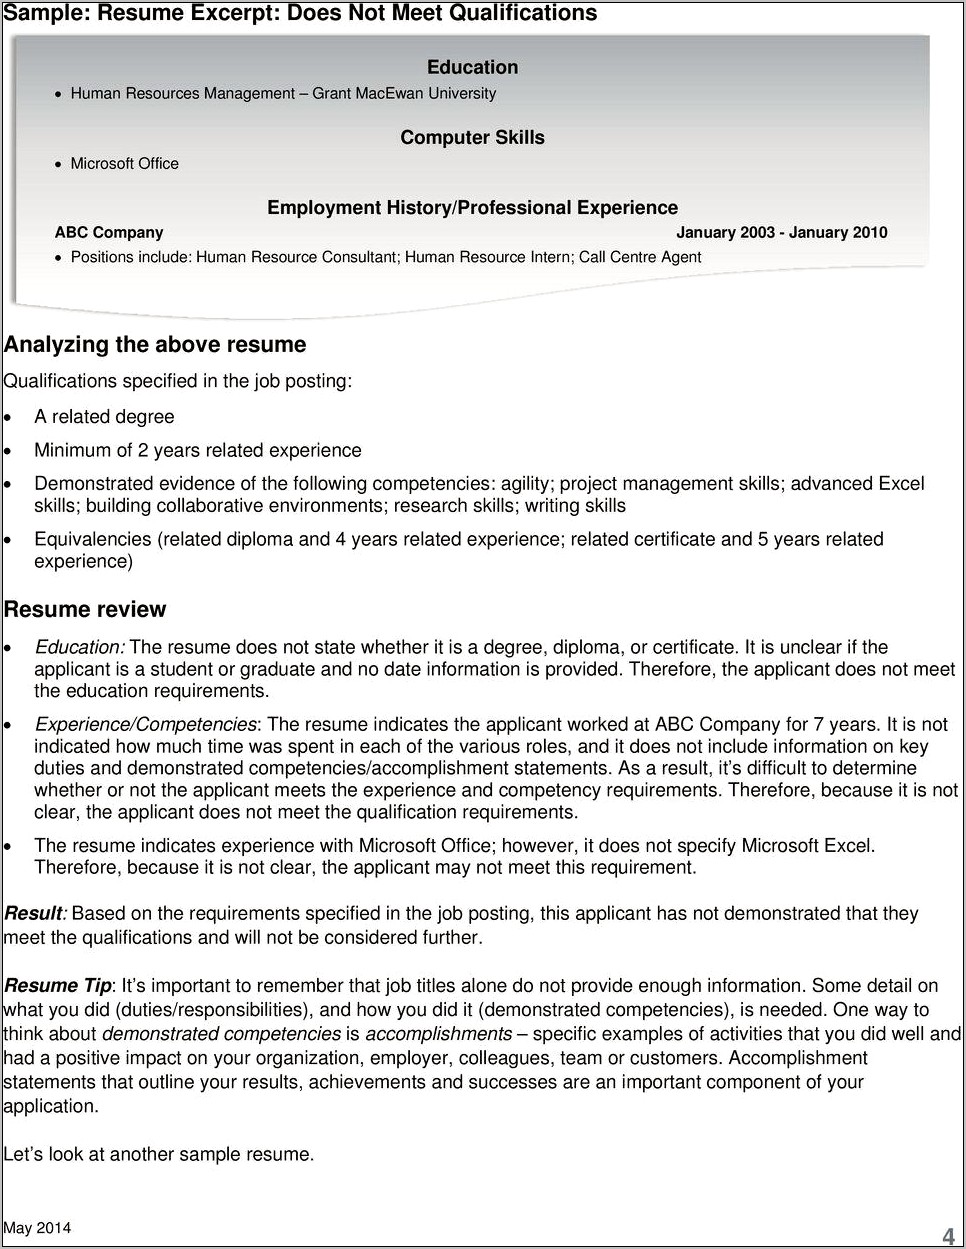 Resume Review Compared To Job Posting